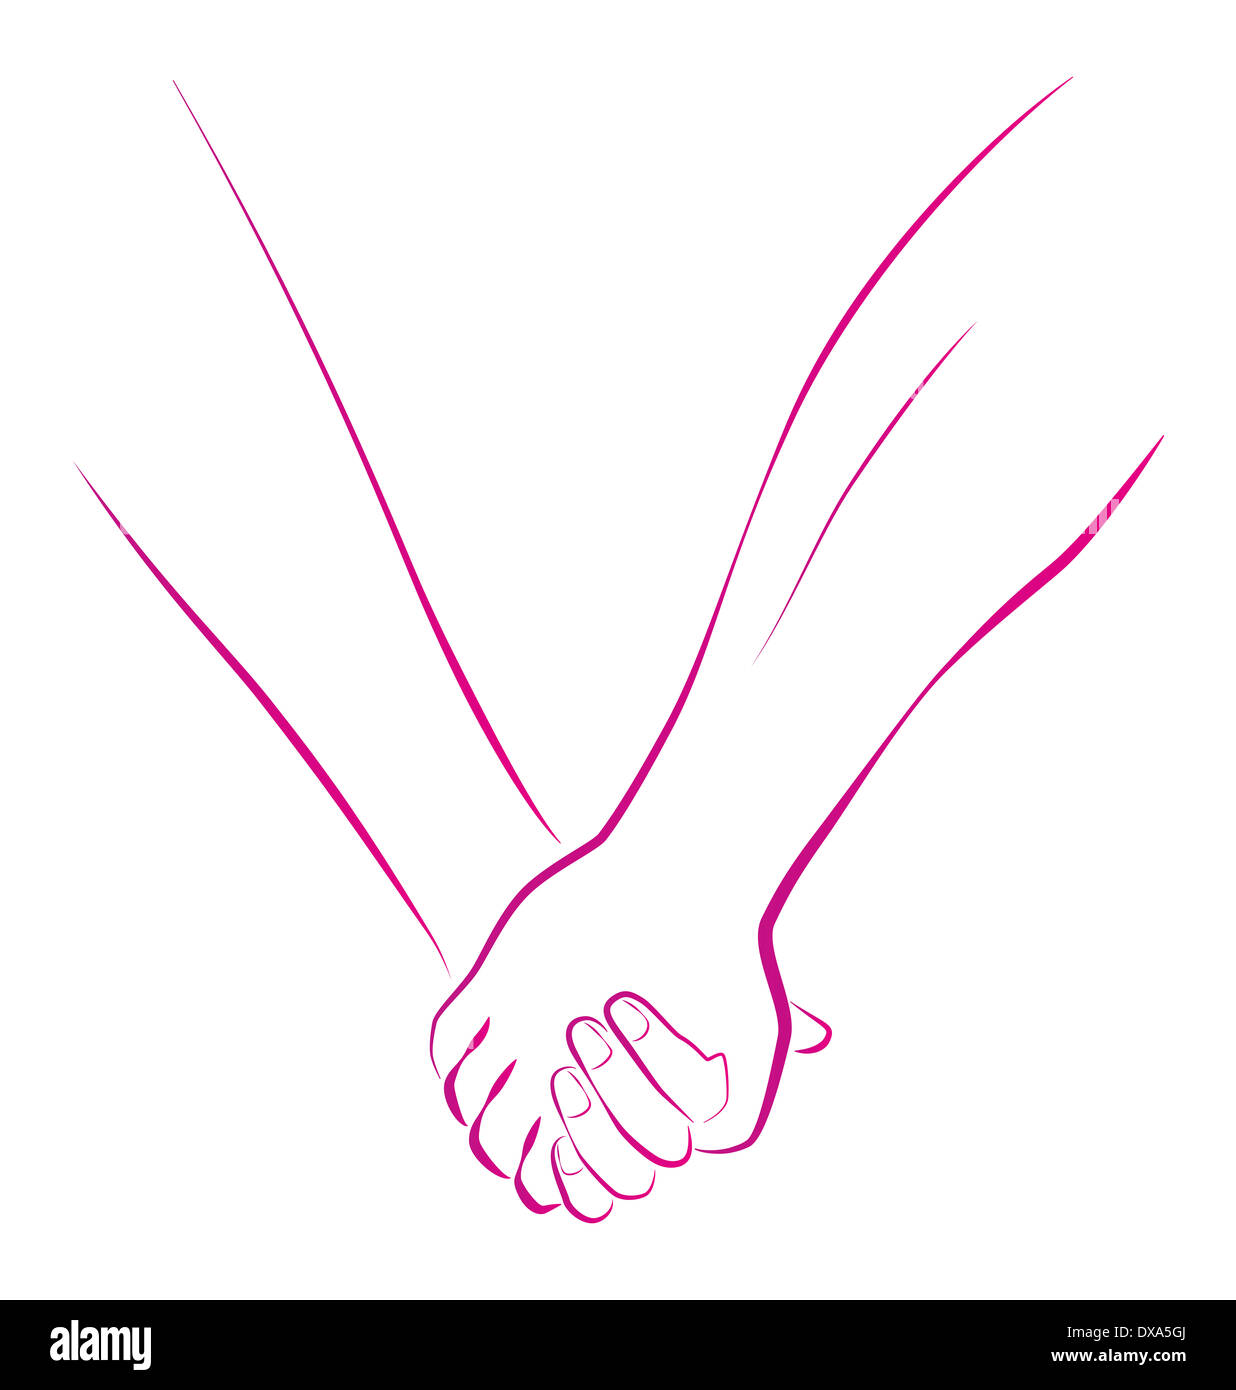 Outline illustration of a female and a male person holding hands. Stock Photo